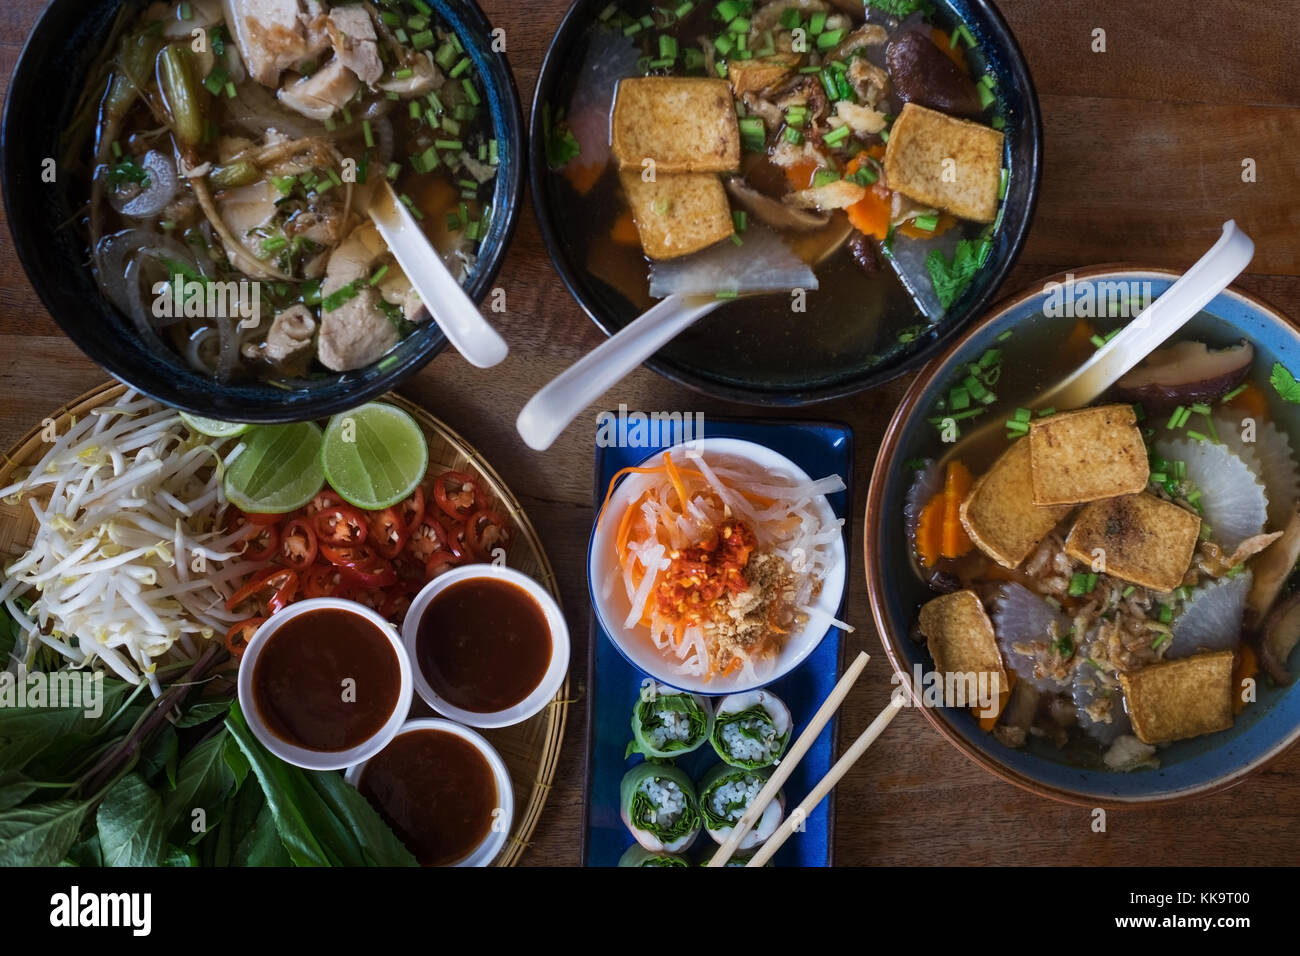 Traditional Vietnamese food. Soups, rolls and fresh herbs. Plates on a wooden surface. Stock Photo